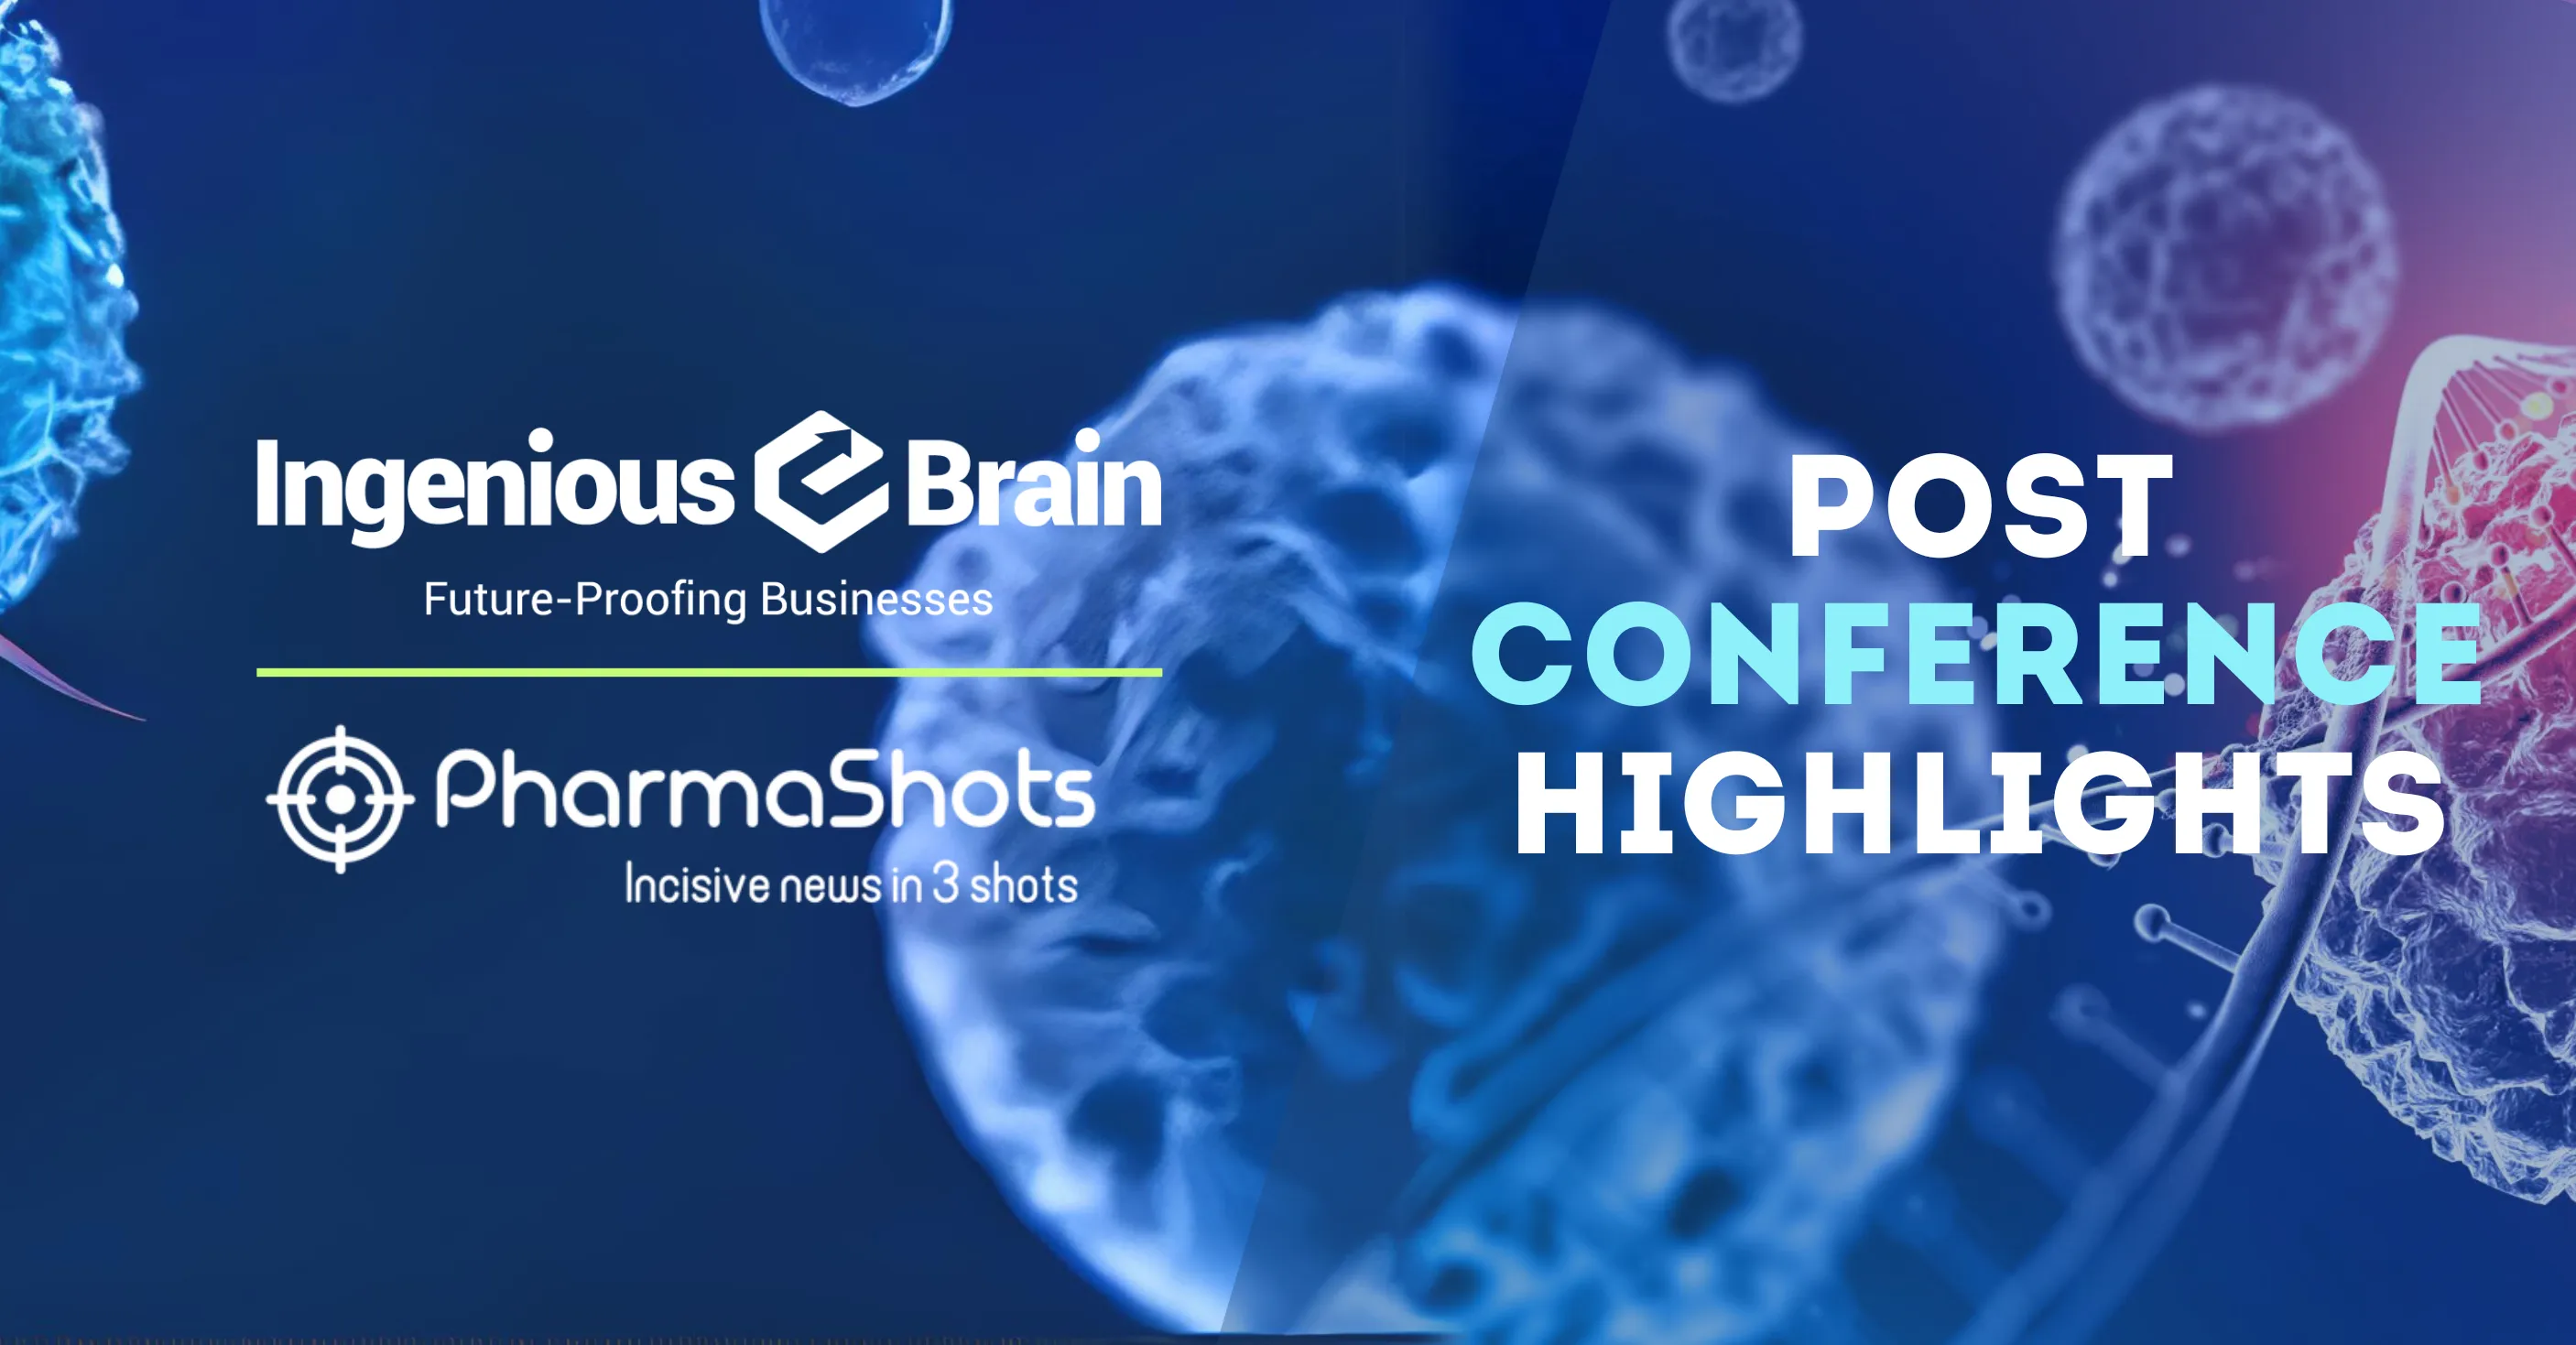 Post Conference Highlights: E-Brain OncoVision: Connecting the Dots in Cancer Care